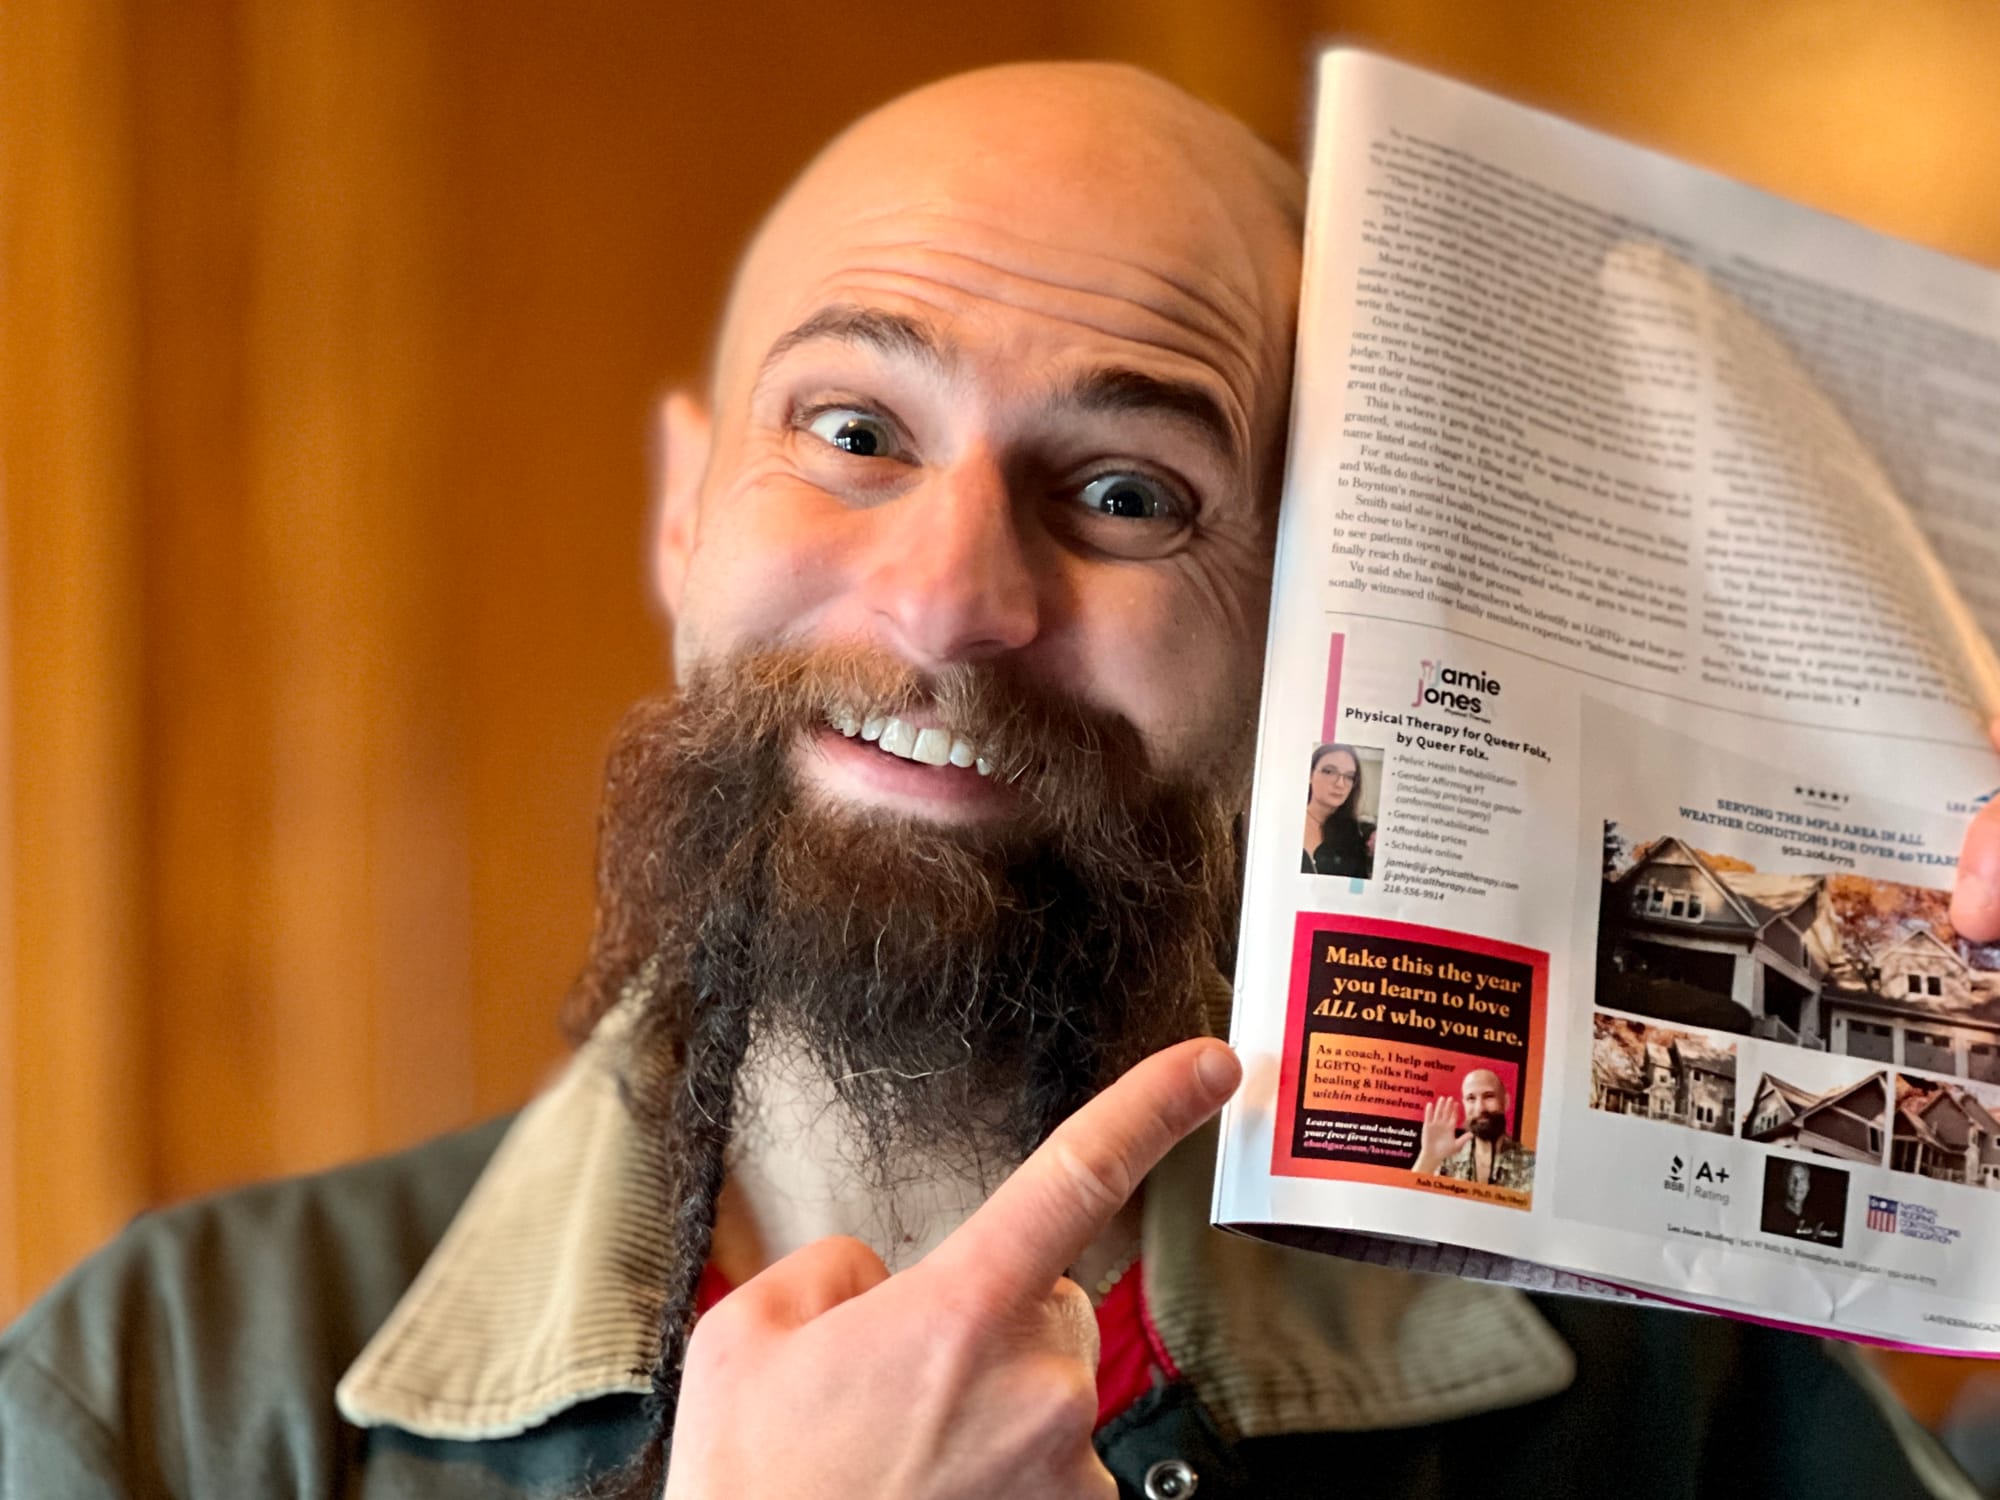 A photo of a bald white man with a beard holding up a copy of Lavender magazine.